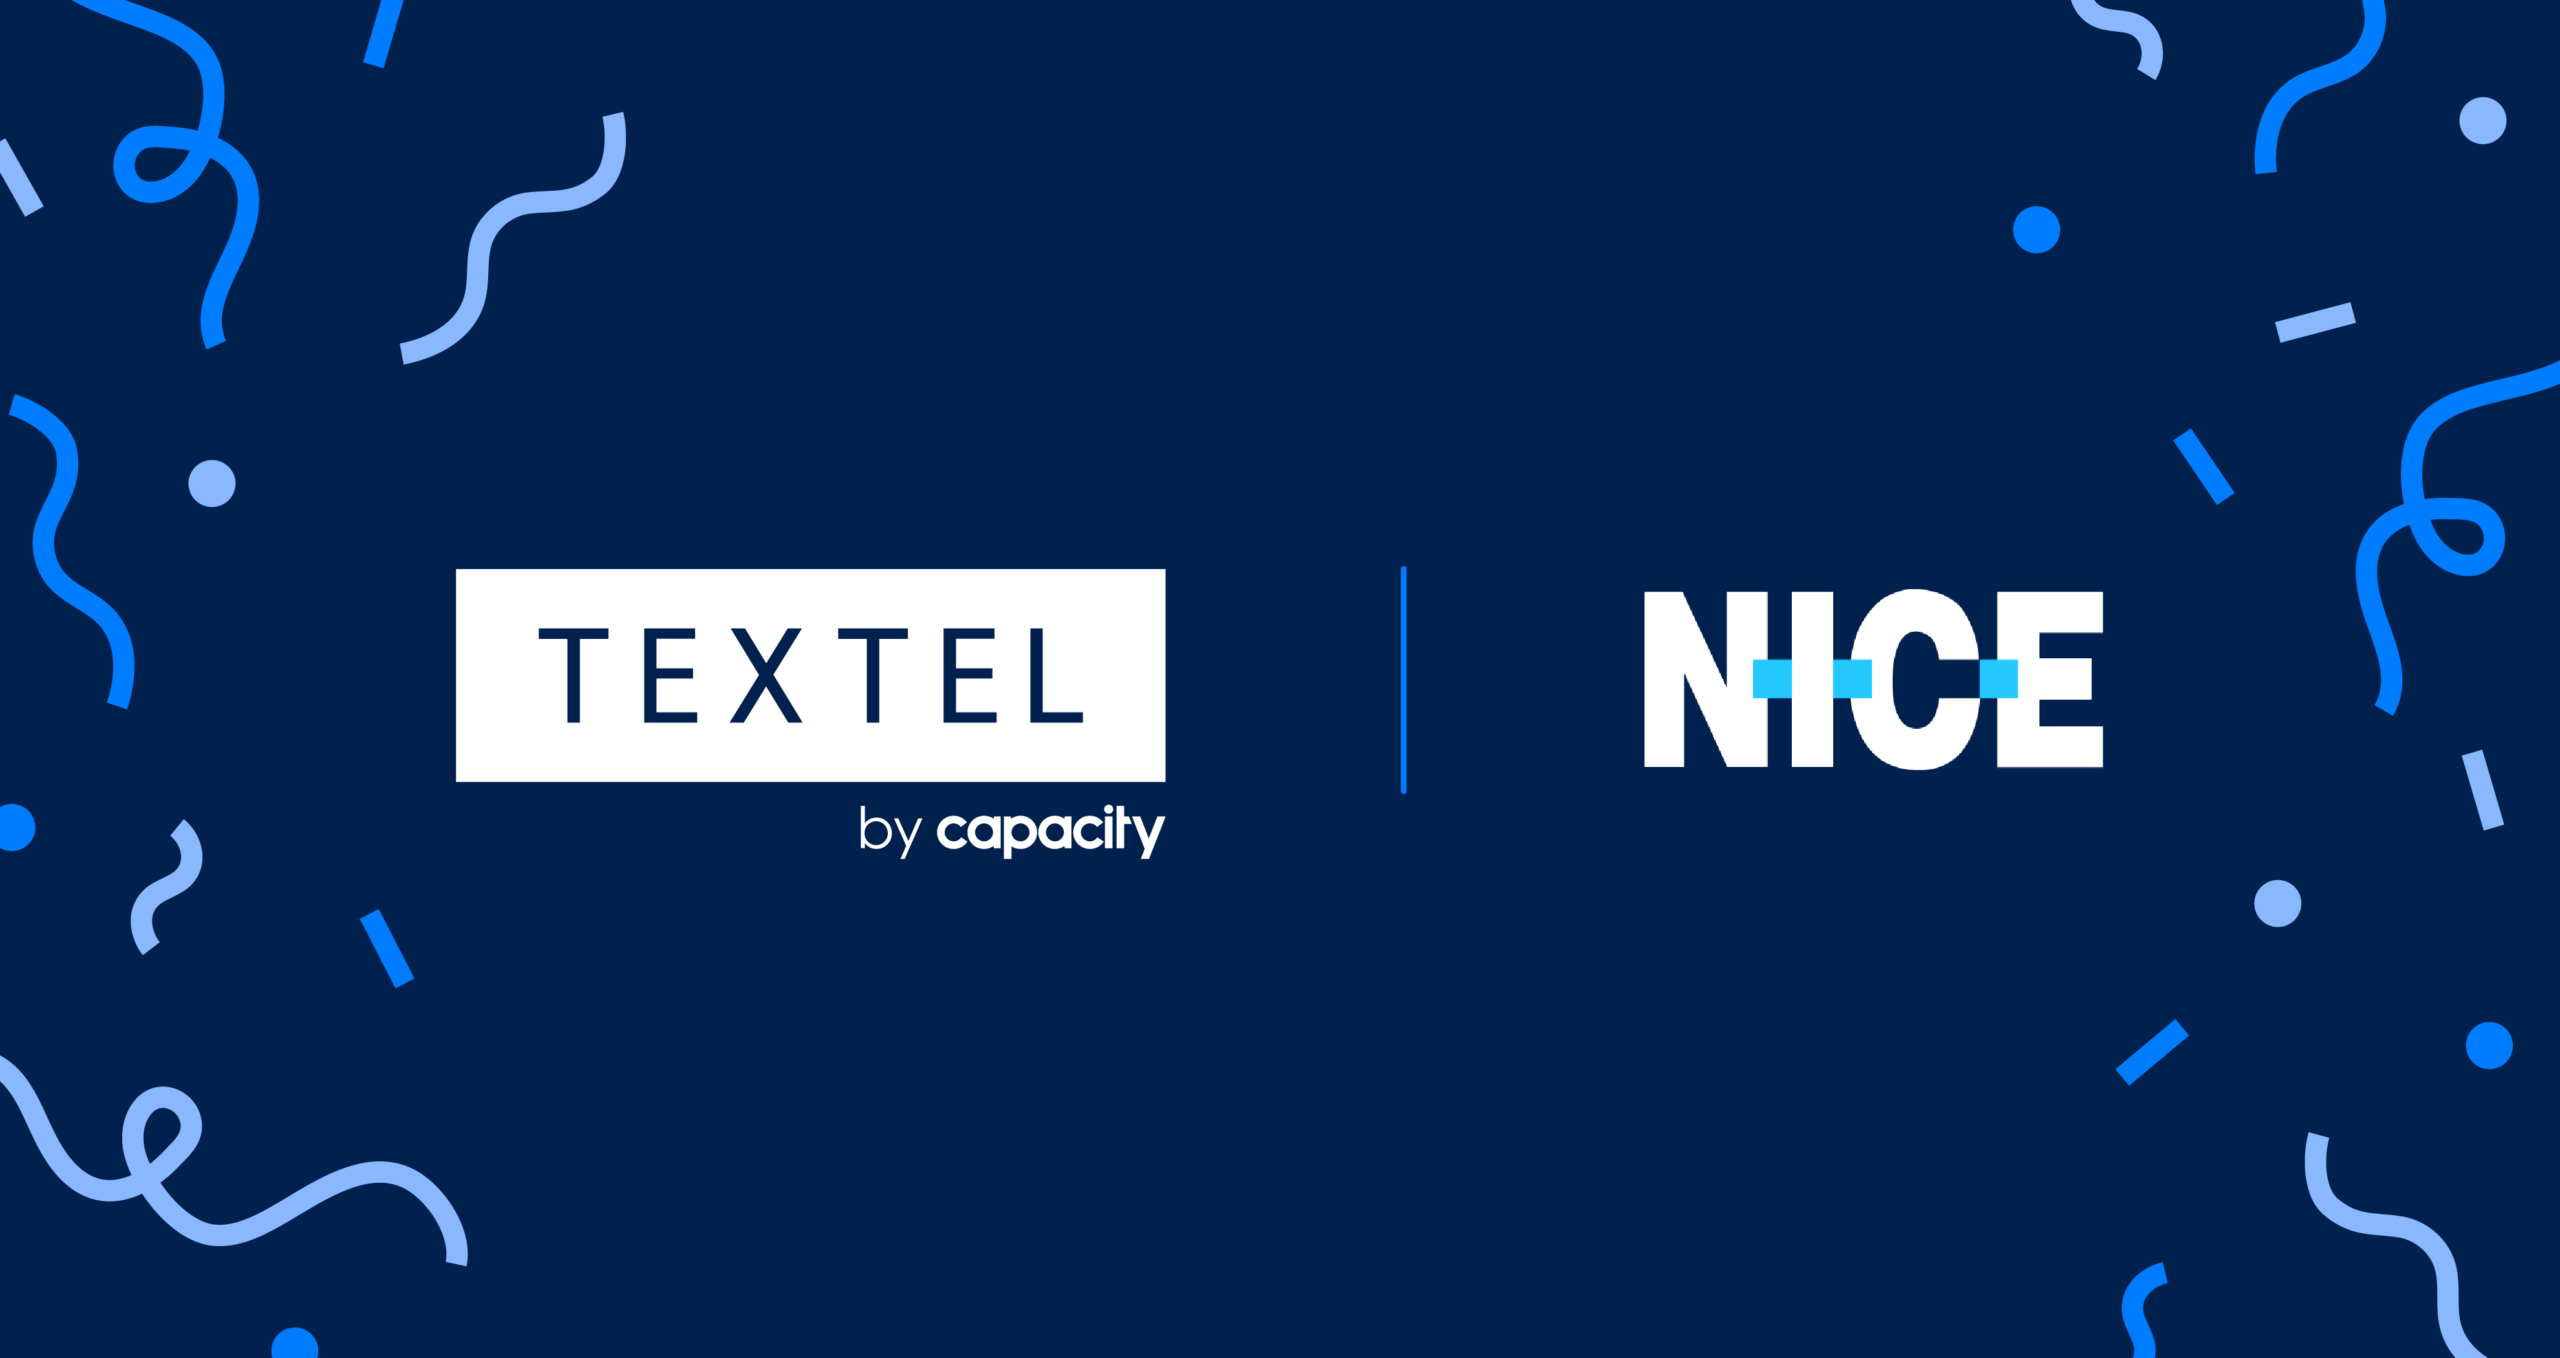 NICE Names Textel by Capacity a Top Partner of the Year 2023